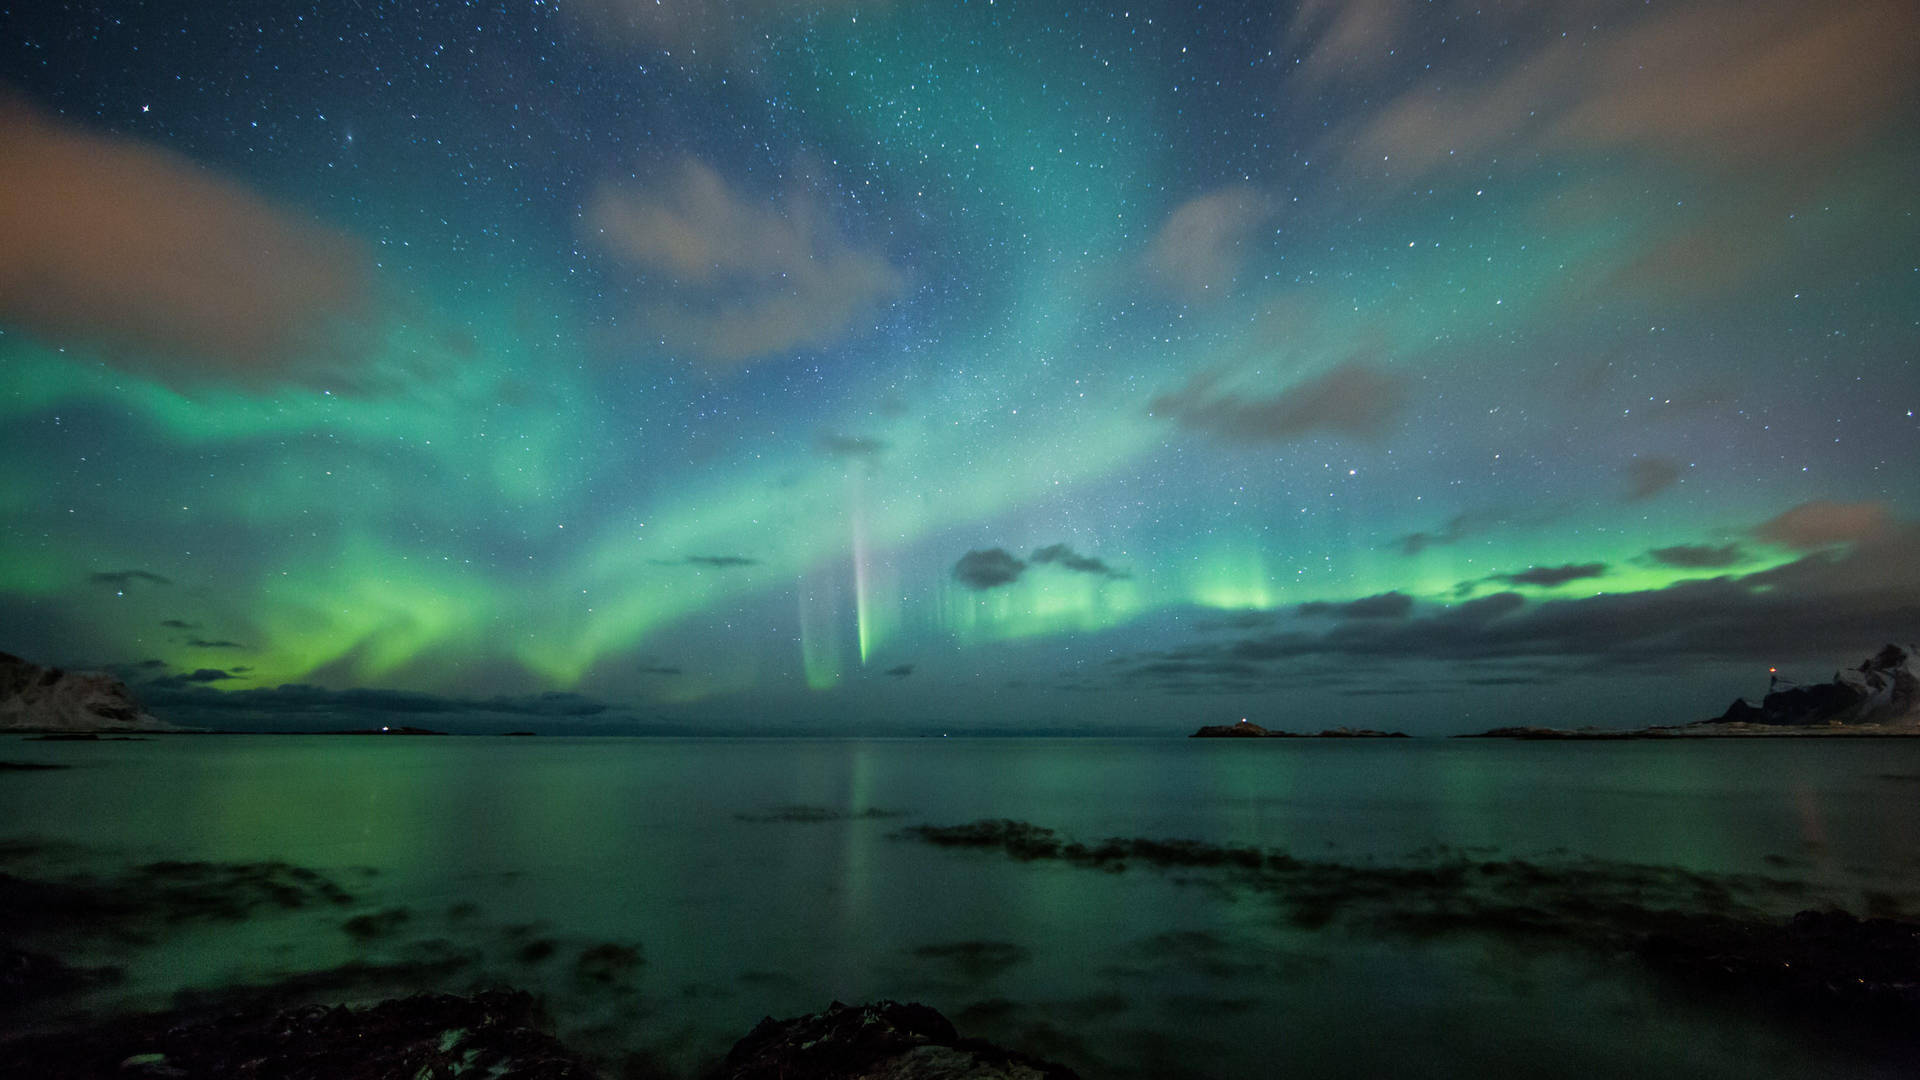 Marvel at the beauty of the Green Aurora Borealis in the night sky Wallpaper